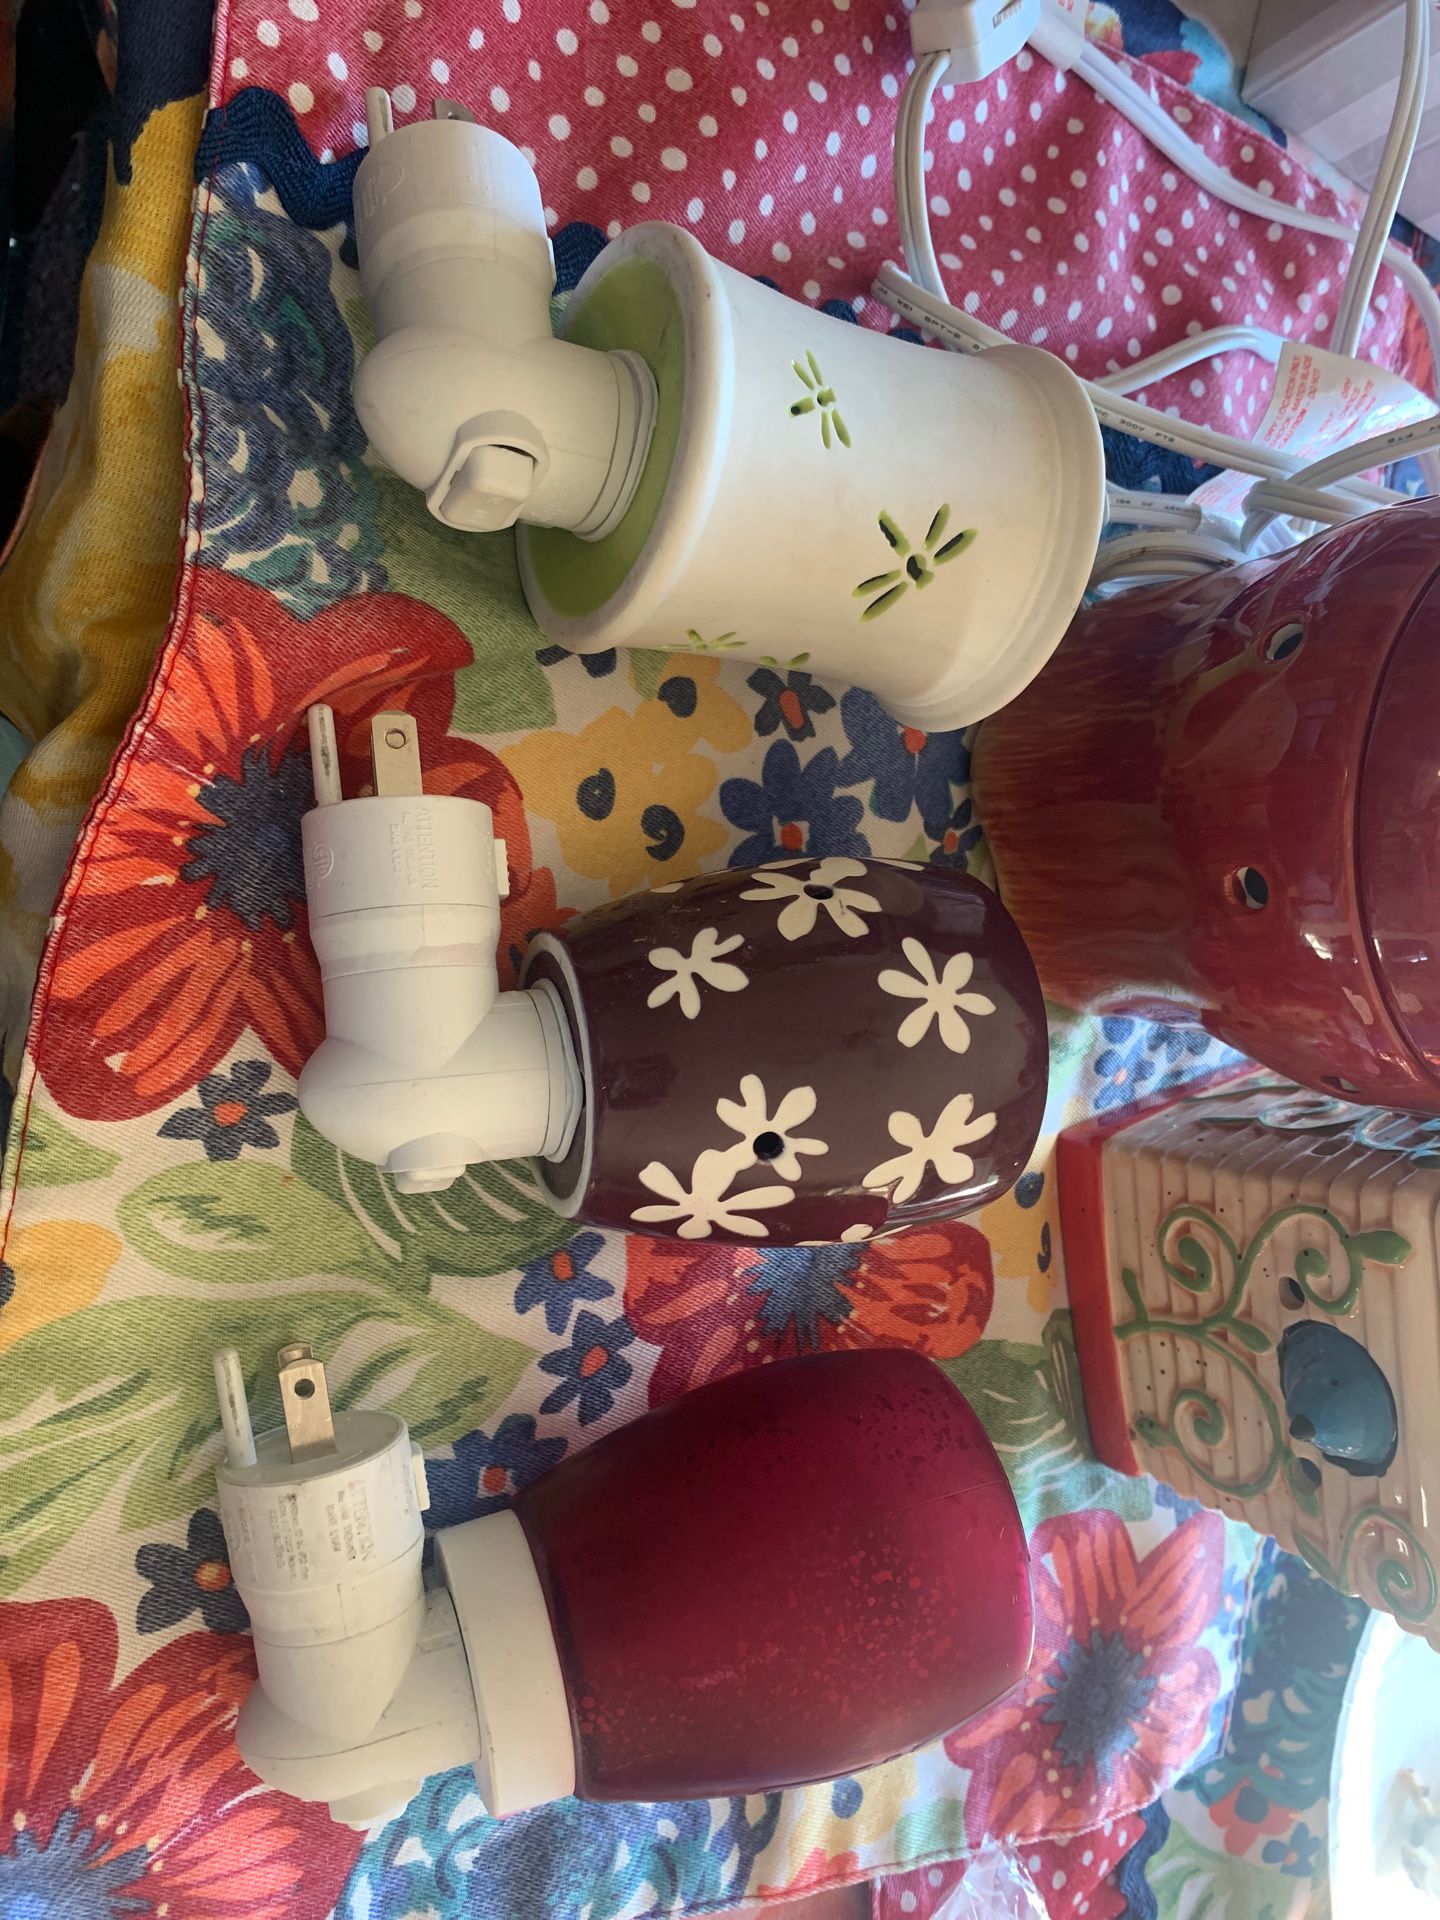 Scentsy warmers